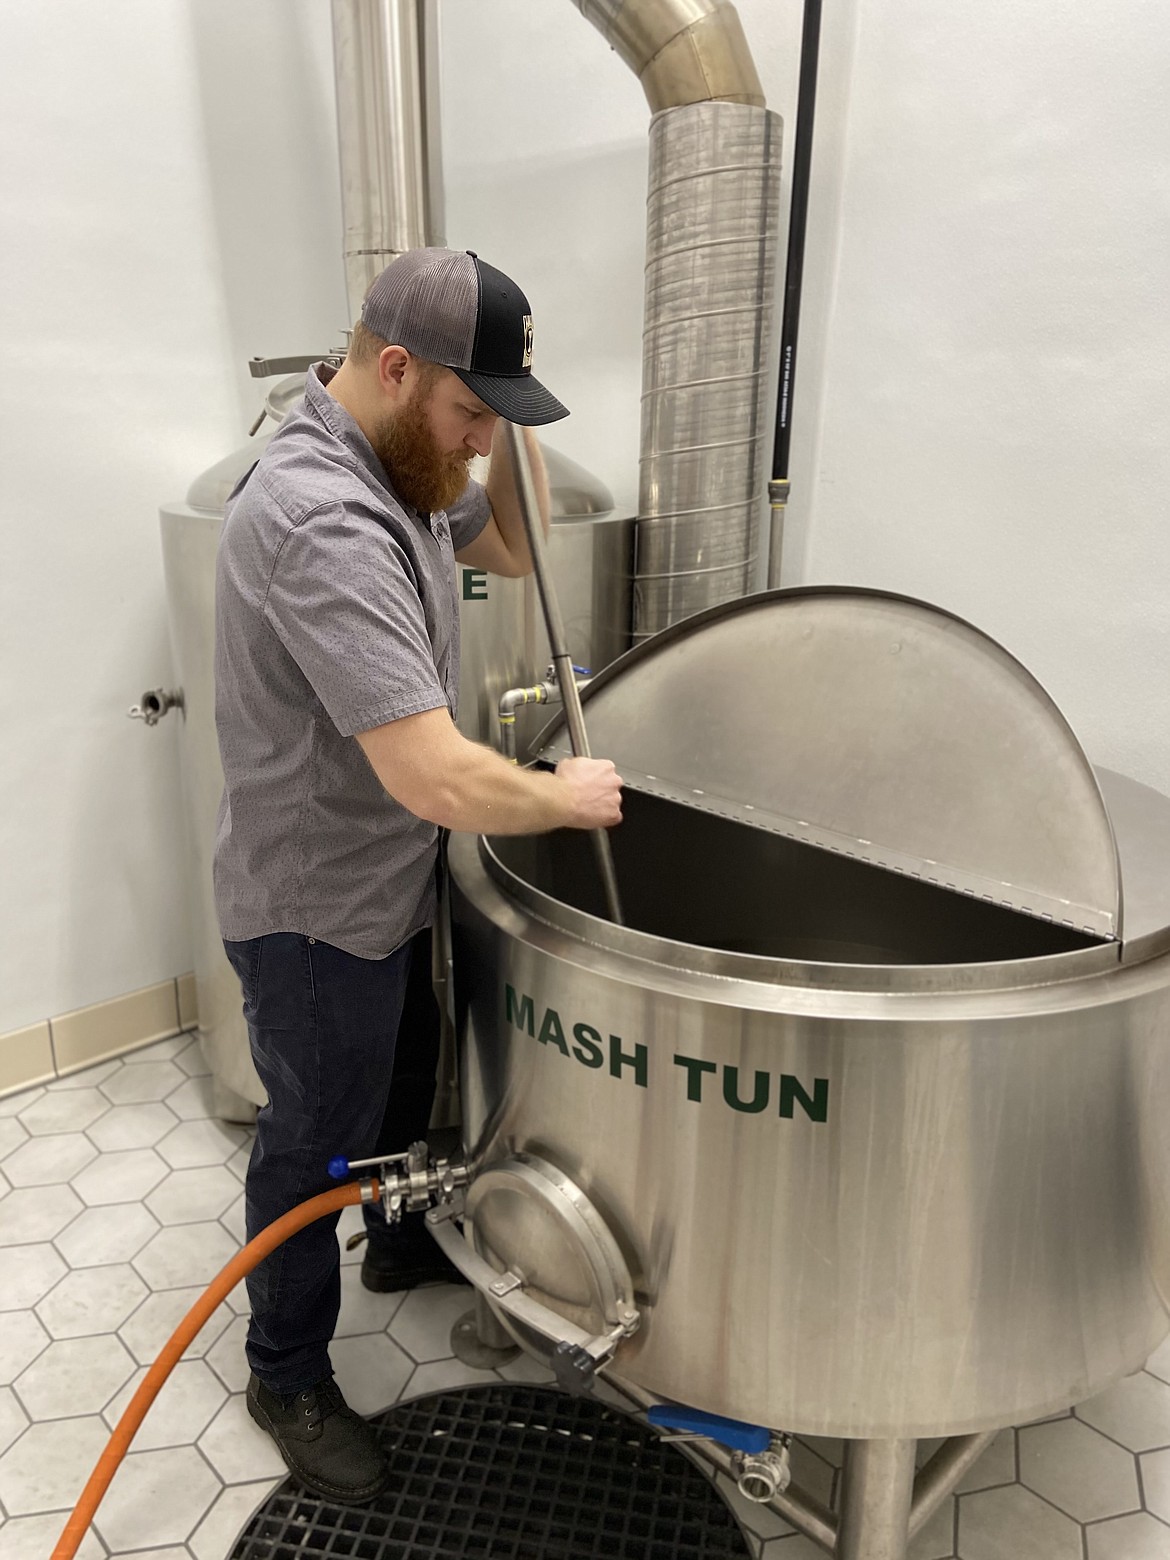 Courtesy photo
Brian Engdahl, owner and head brewer at Chalice Brewing, tests the brewing equipment at the downtown Coeur d'Alene business. It opens Friday at 413 E. Sherman Ave. (beside the Art Spirit Gallery).